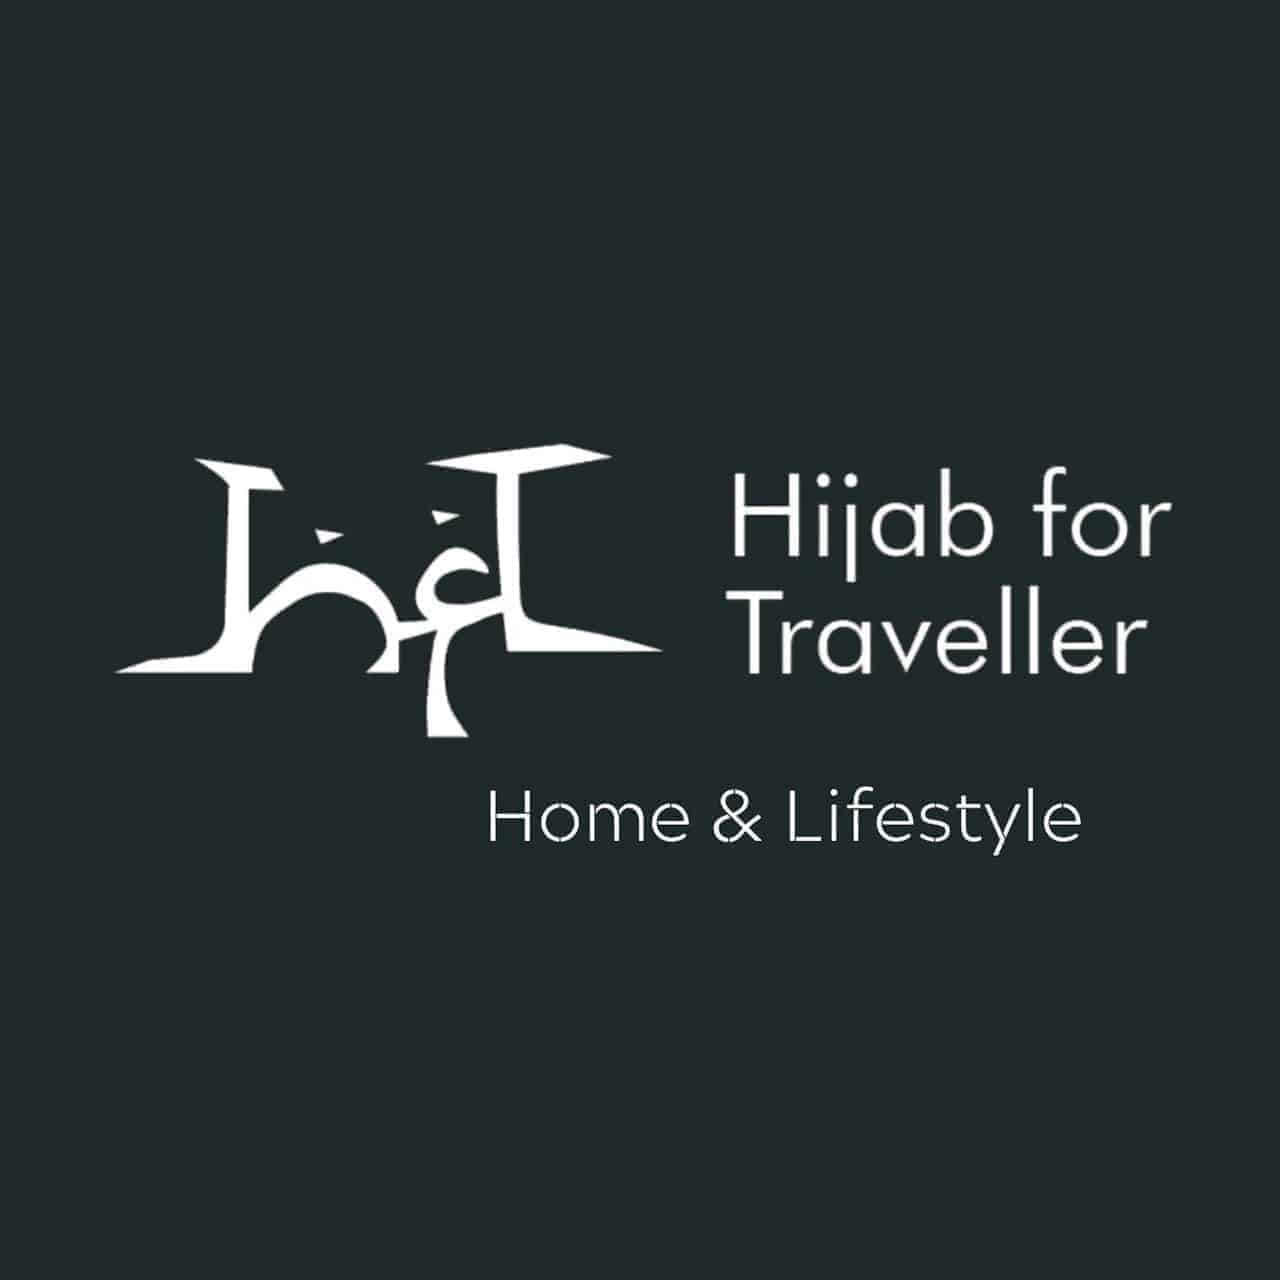 hijab-for-travel